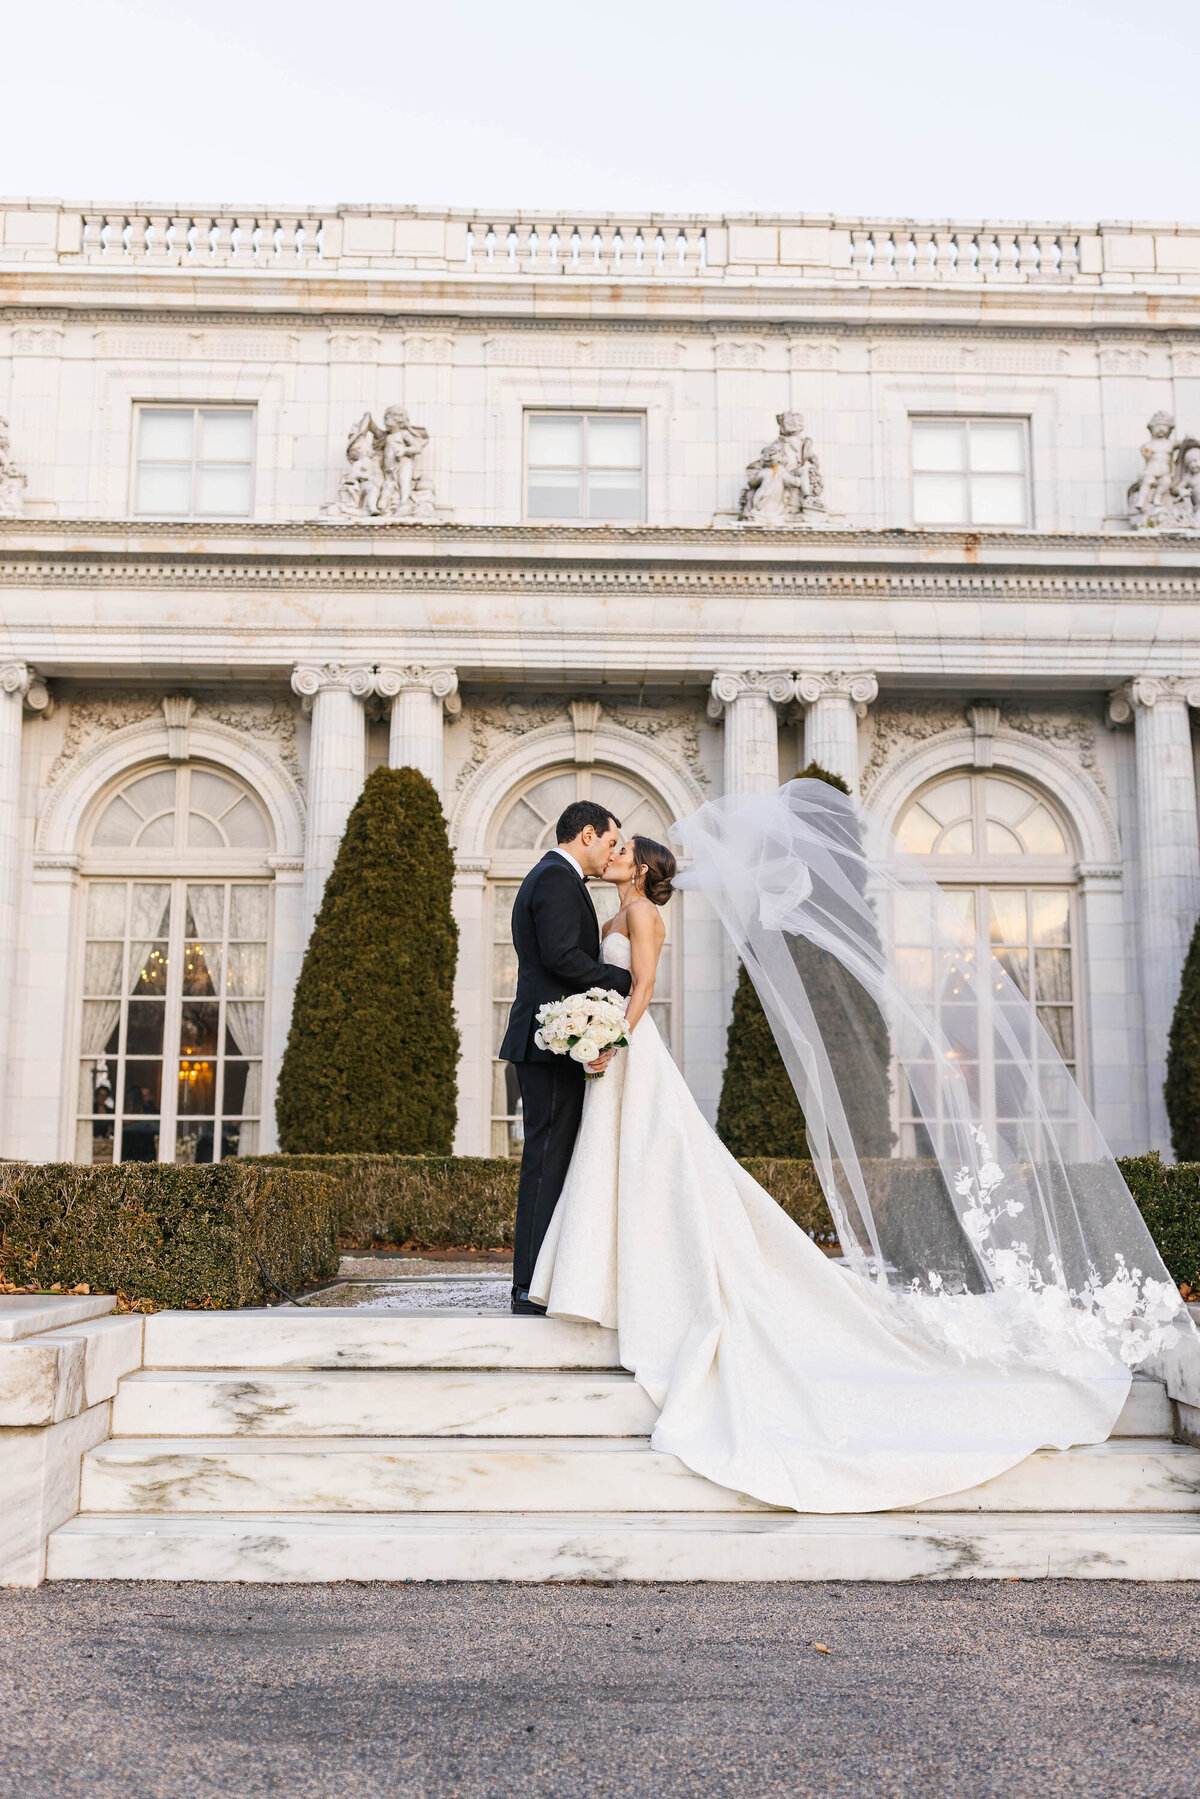 erica-renee-beauty-newport-rosecliff-mansion-wedding--wedding-hair-and-makeup-squad-duo-team-high-end-nyc-bride-classic-bride-hospitality